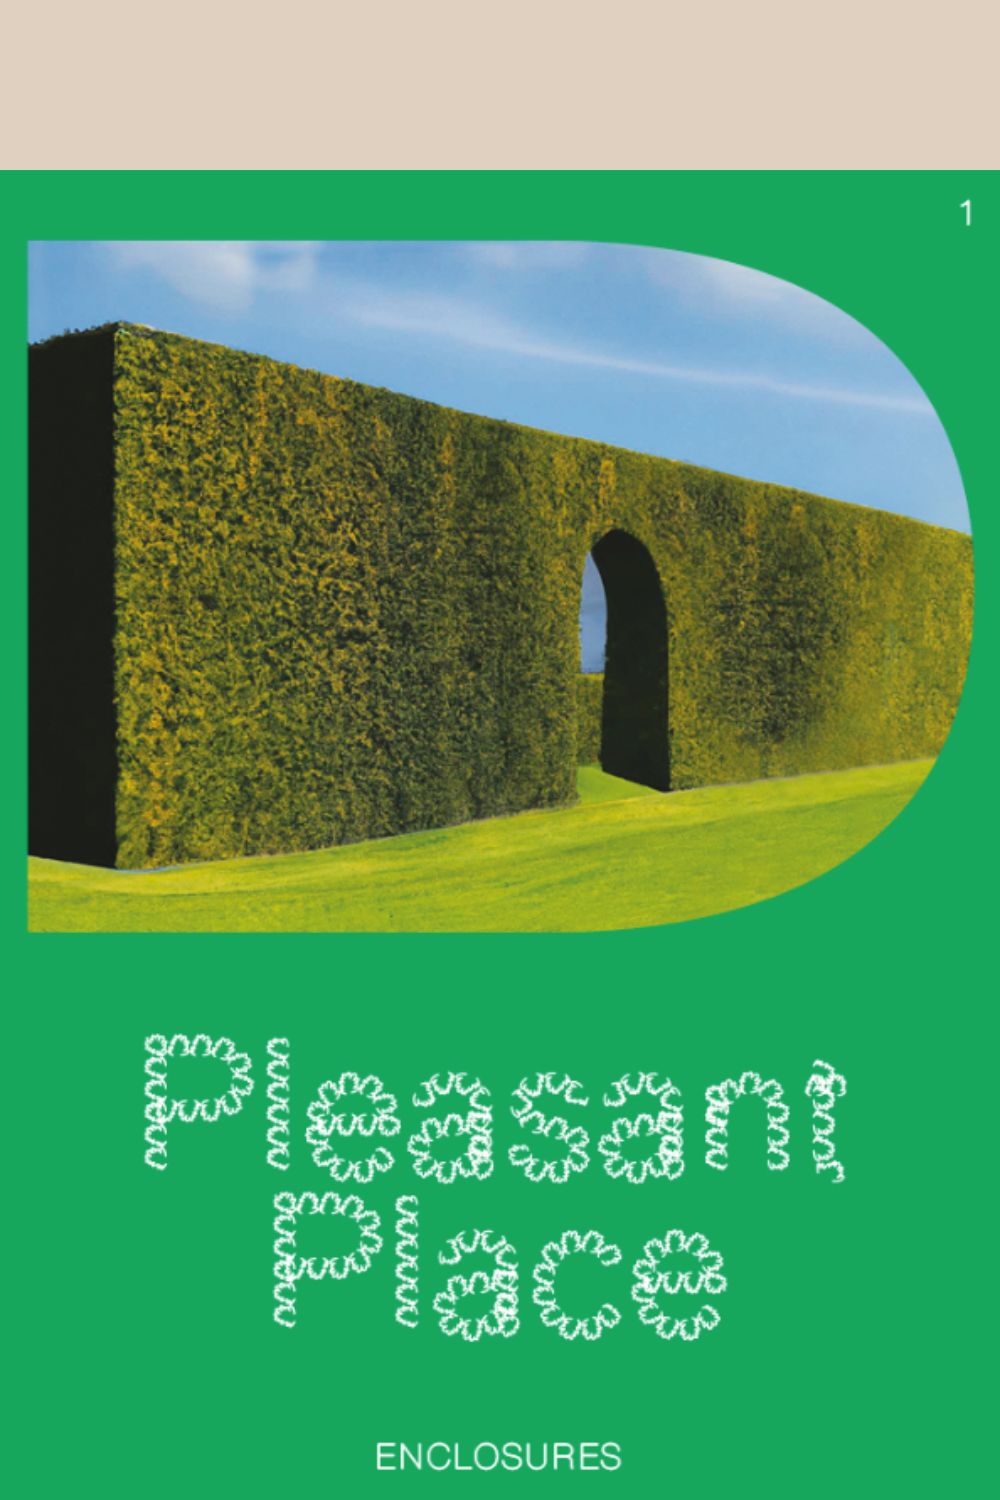 Pleasant Place Magazine Issue 1 cover with large manicured hedge with an arch cut into it